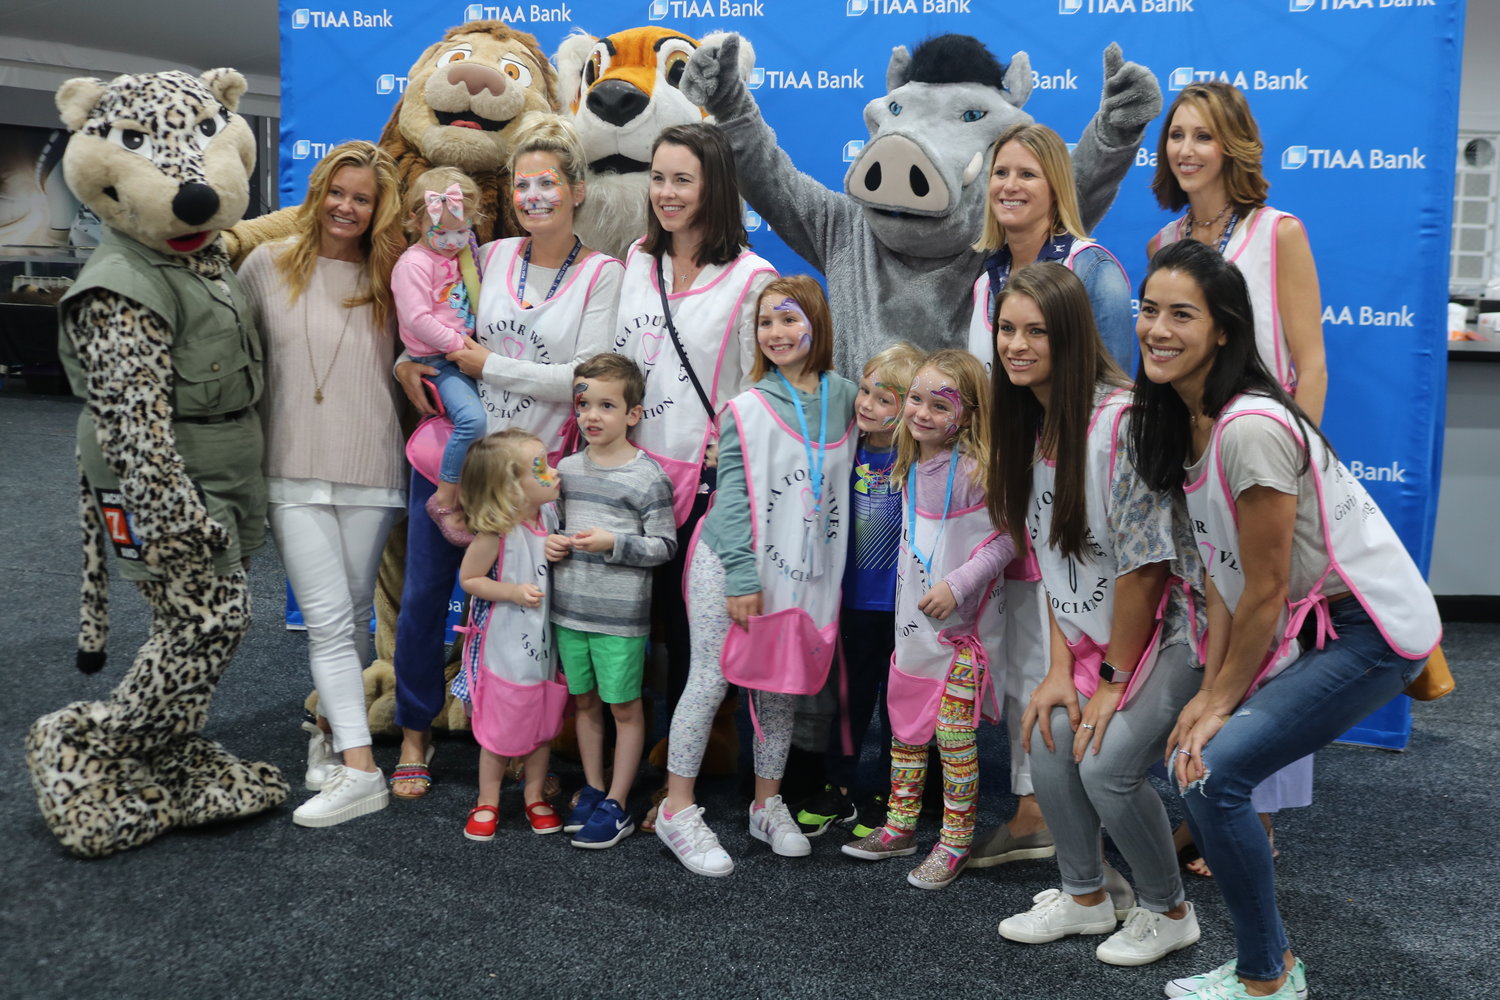 Chairperson Tabitha Furyk (left) and other PGA TOUR wives pose with Jacksonville Zoo characters.